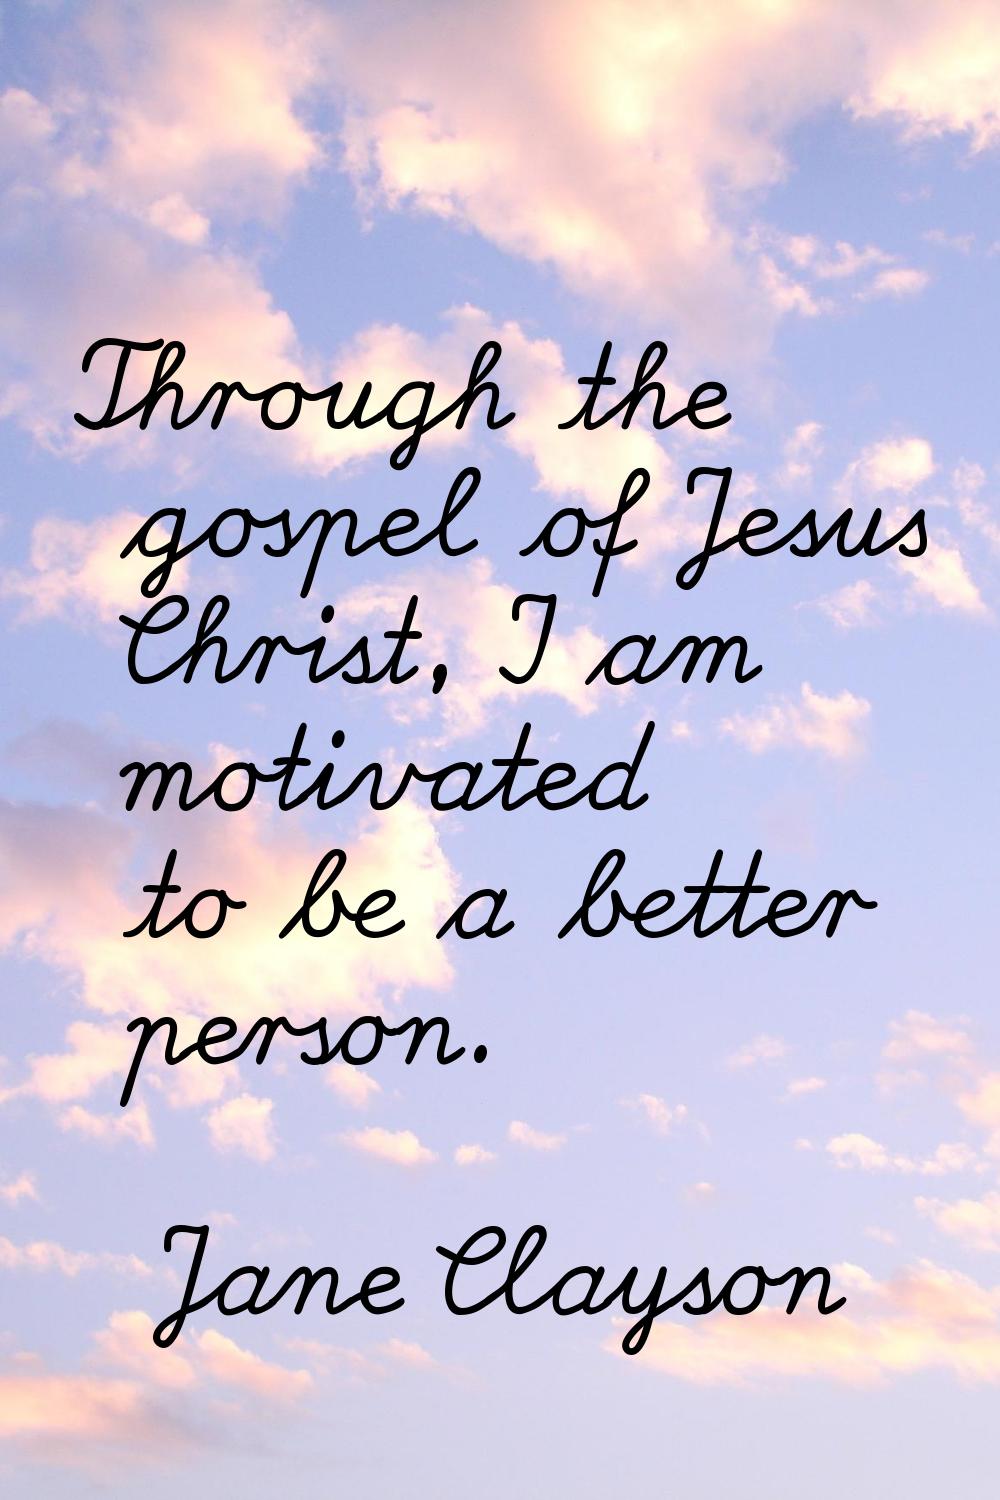 Through the gospel of Jesus Christ, I am motivated to be a better person.